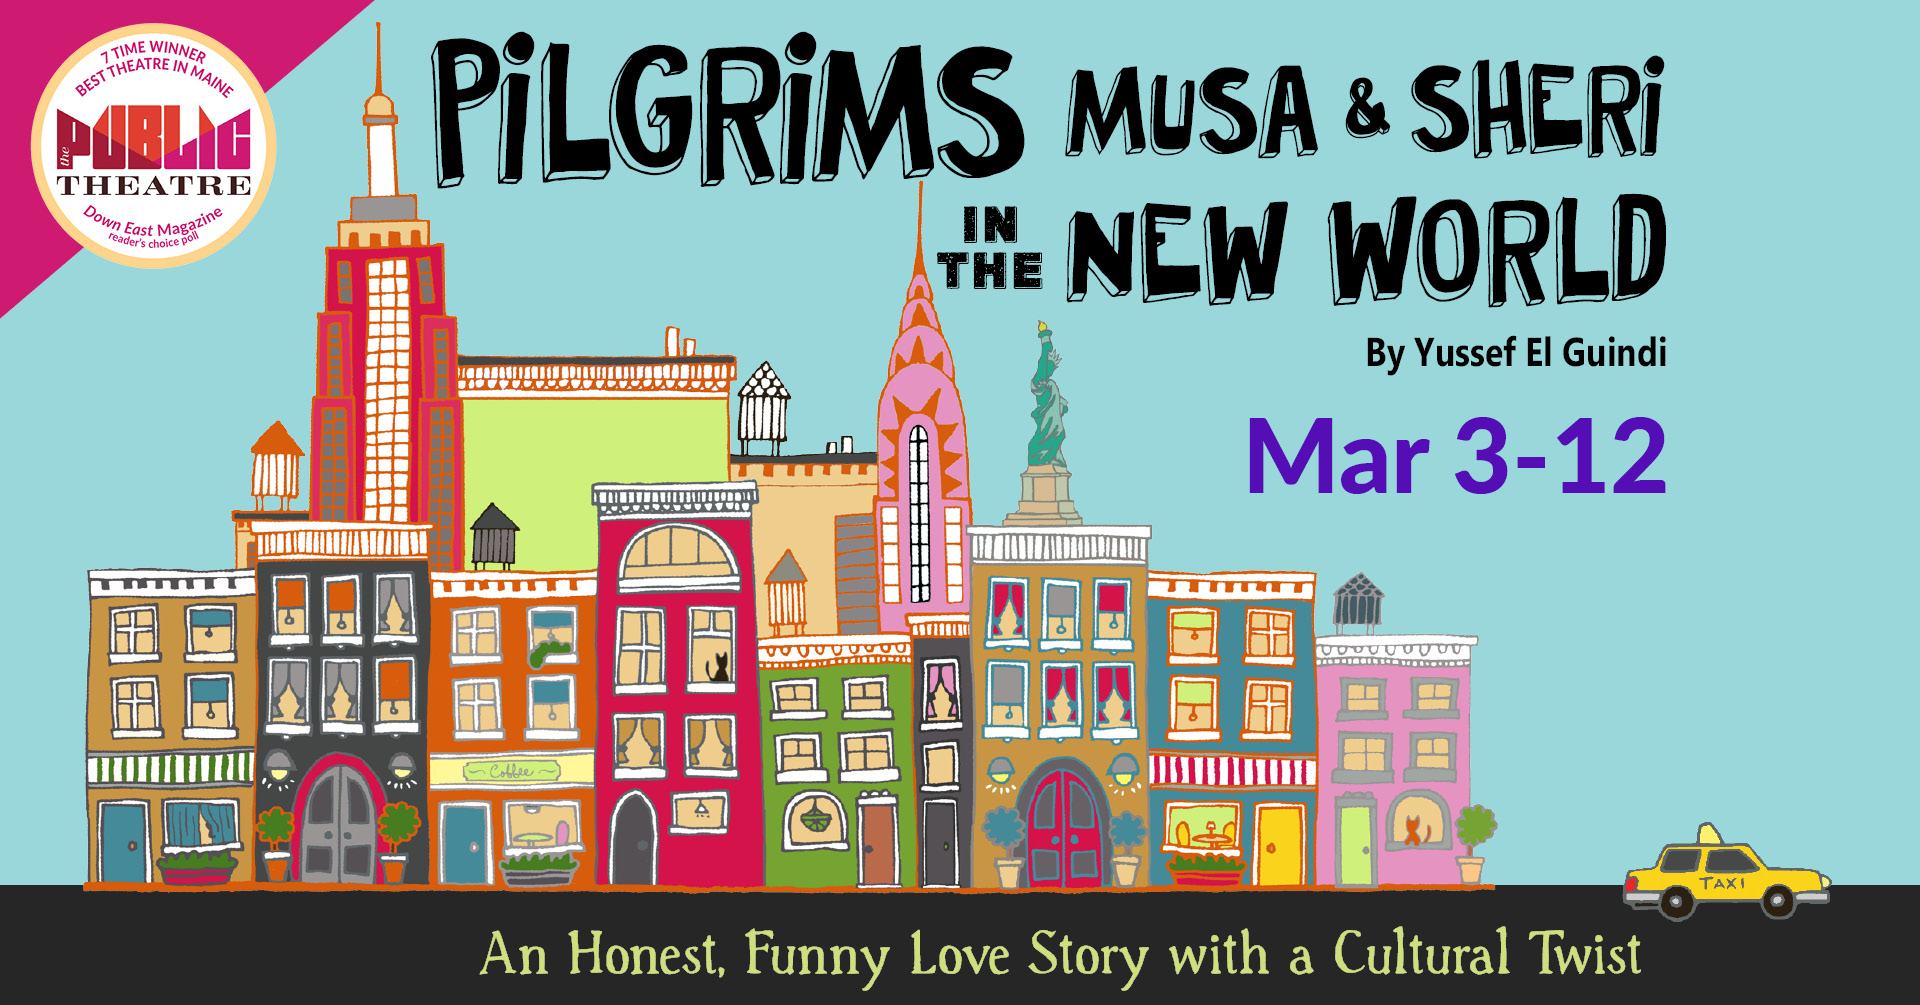 Pilgrims Musa & Sheri in the New World by Yussef El Guindi
The Public Theatre | March 3-12, 2023